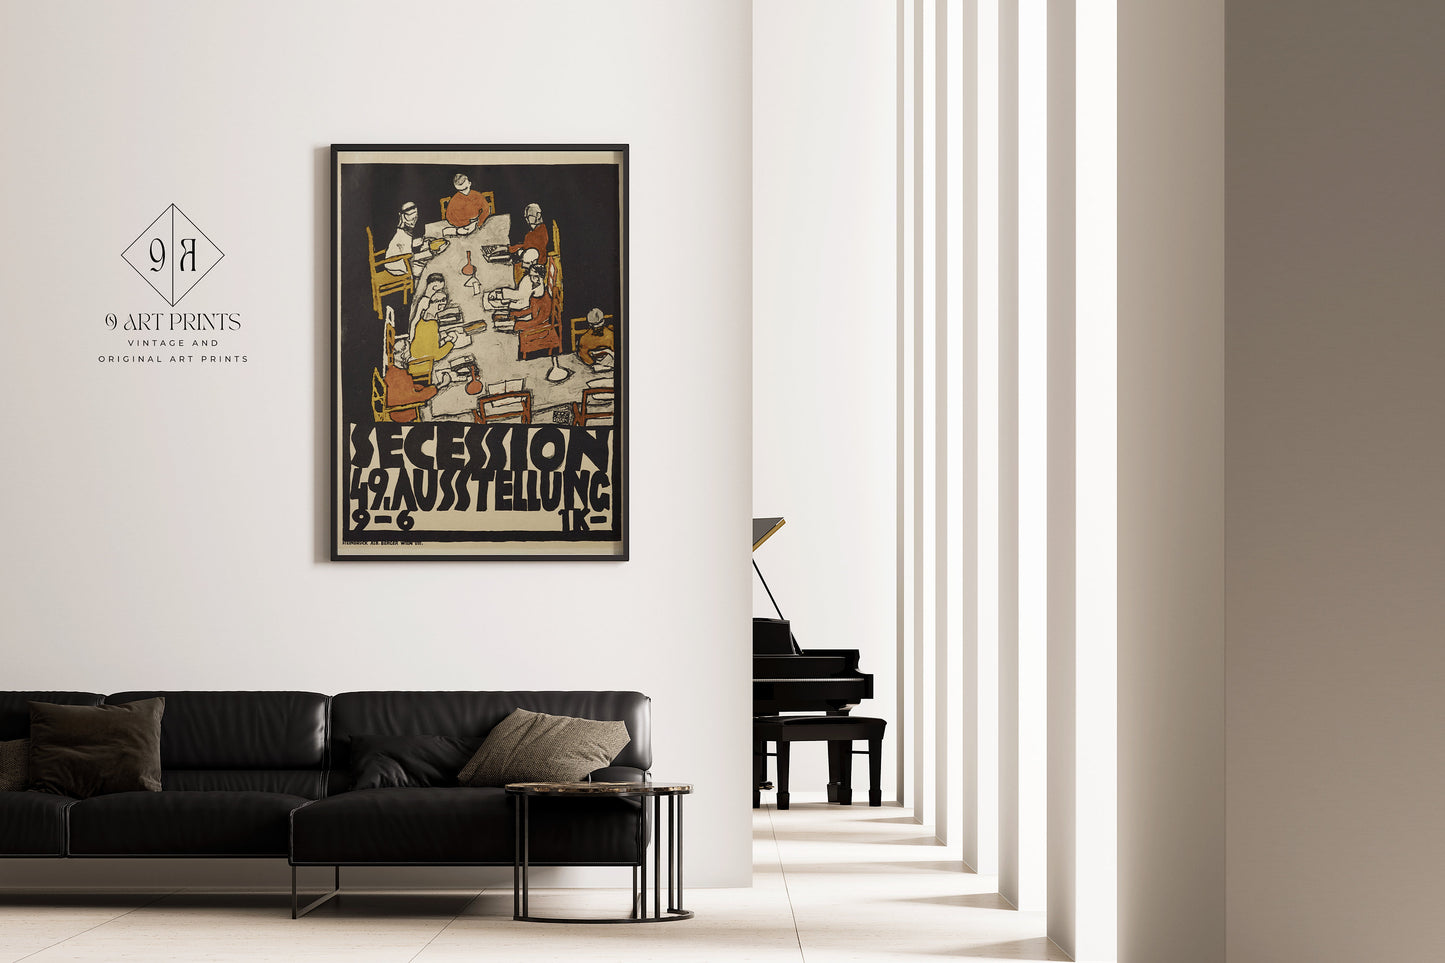 Egon Schiele Vienna Secession Fine Art Poster Famous Painting Vintage Gold Exhibition Ready to hang Framed Home Office Decor Museum Print